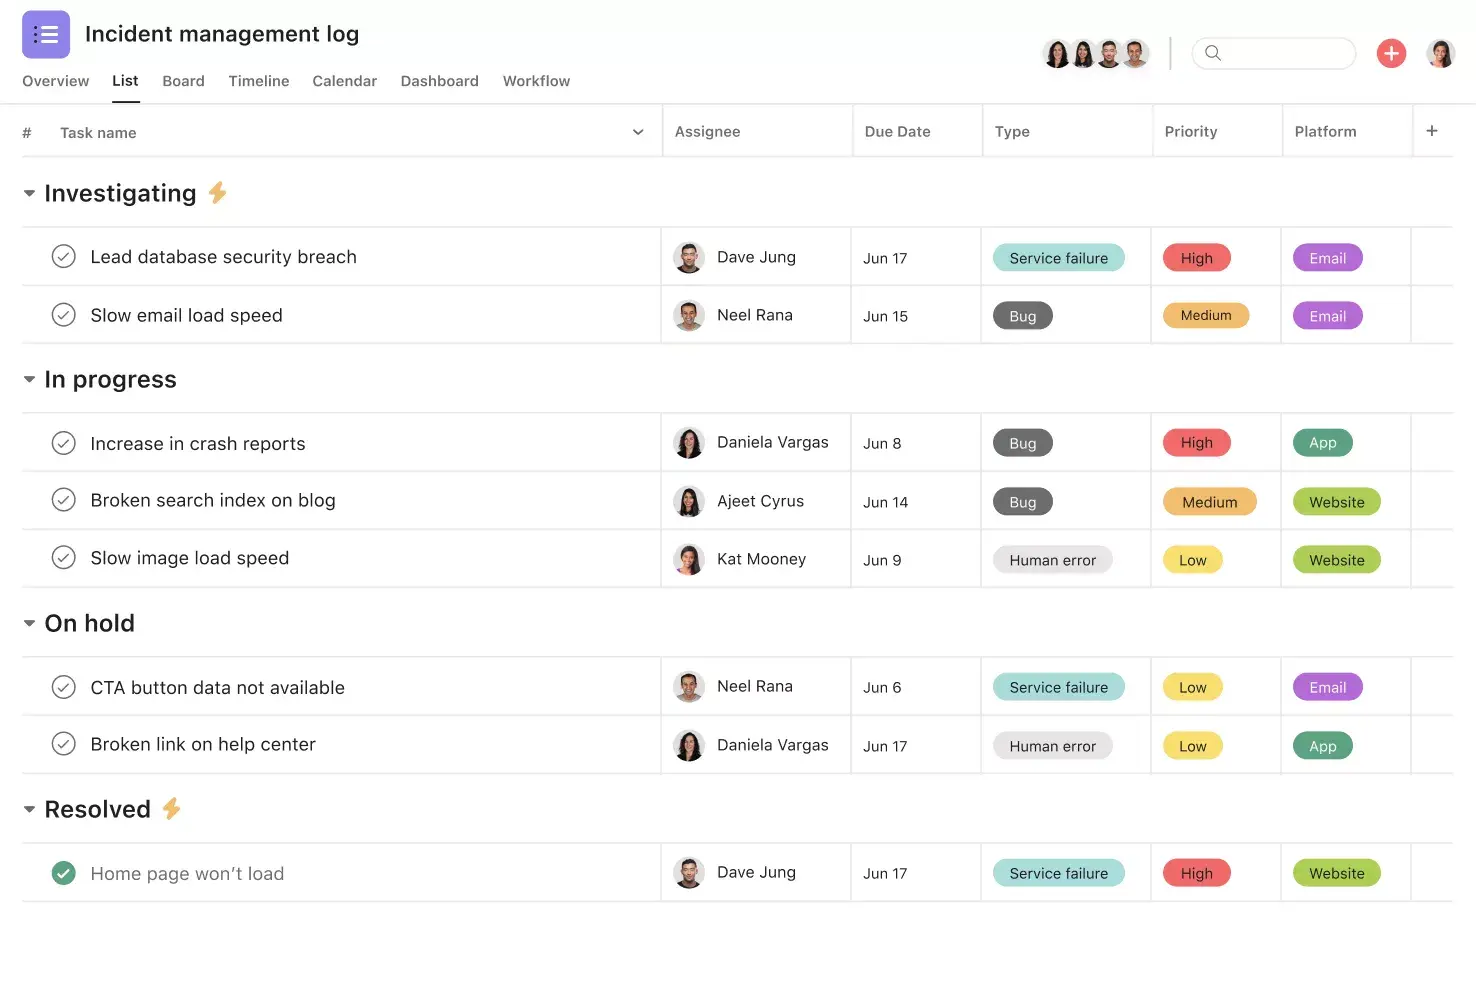 [Product ui] Incident management template, spreadsheet style project in Asana (list view)